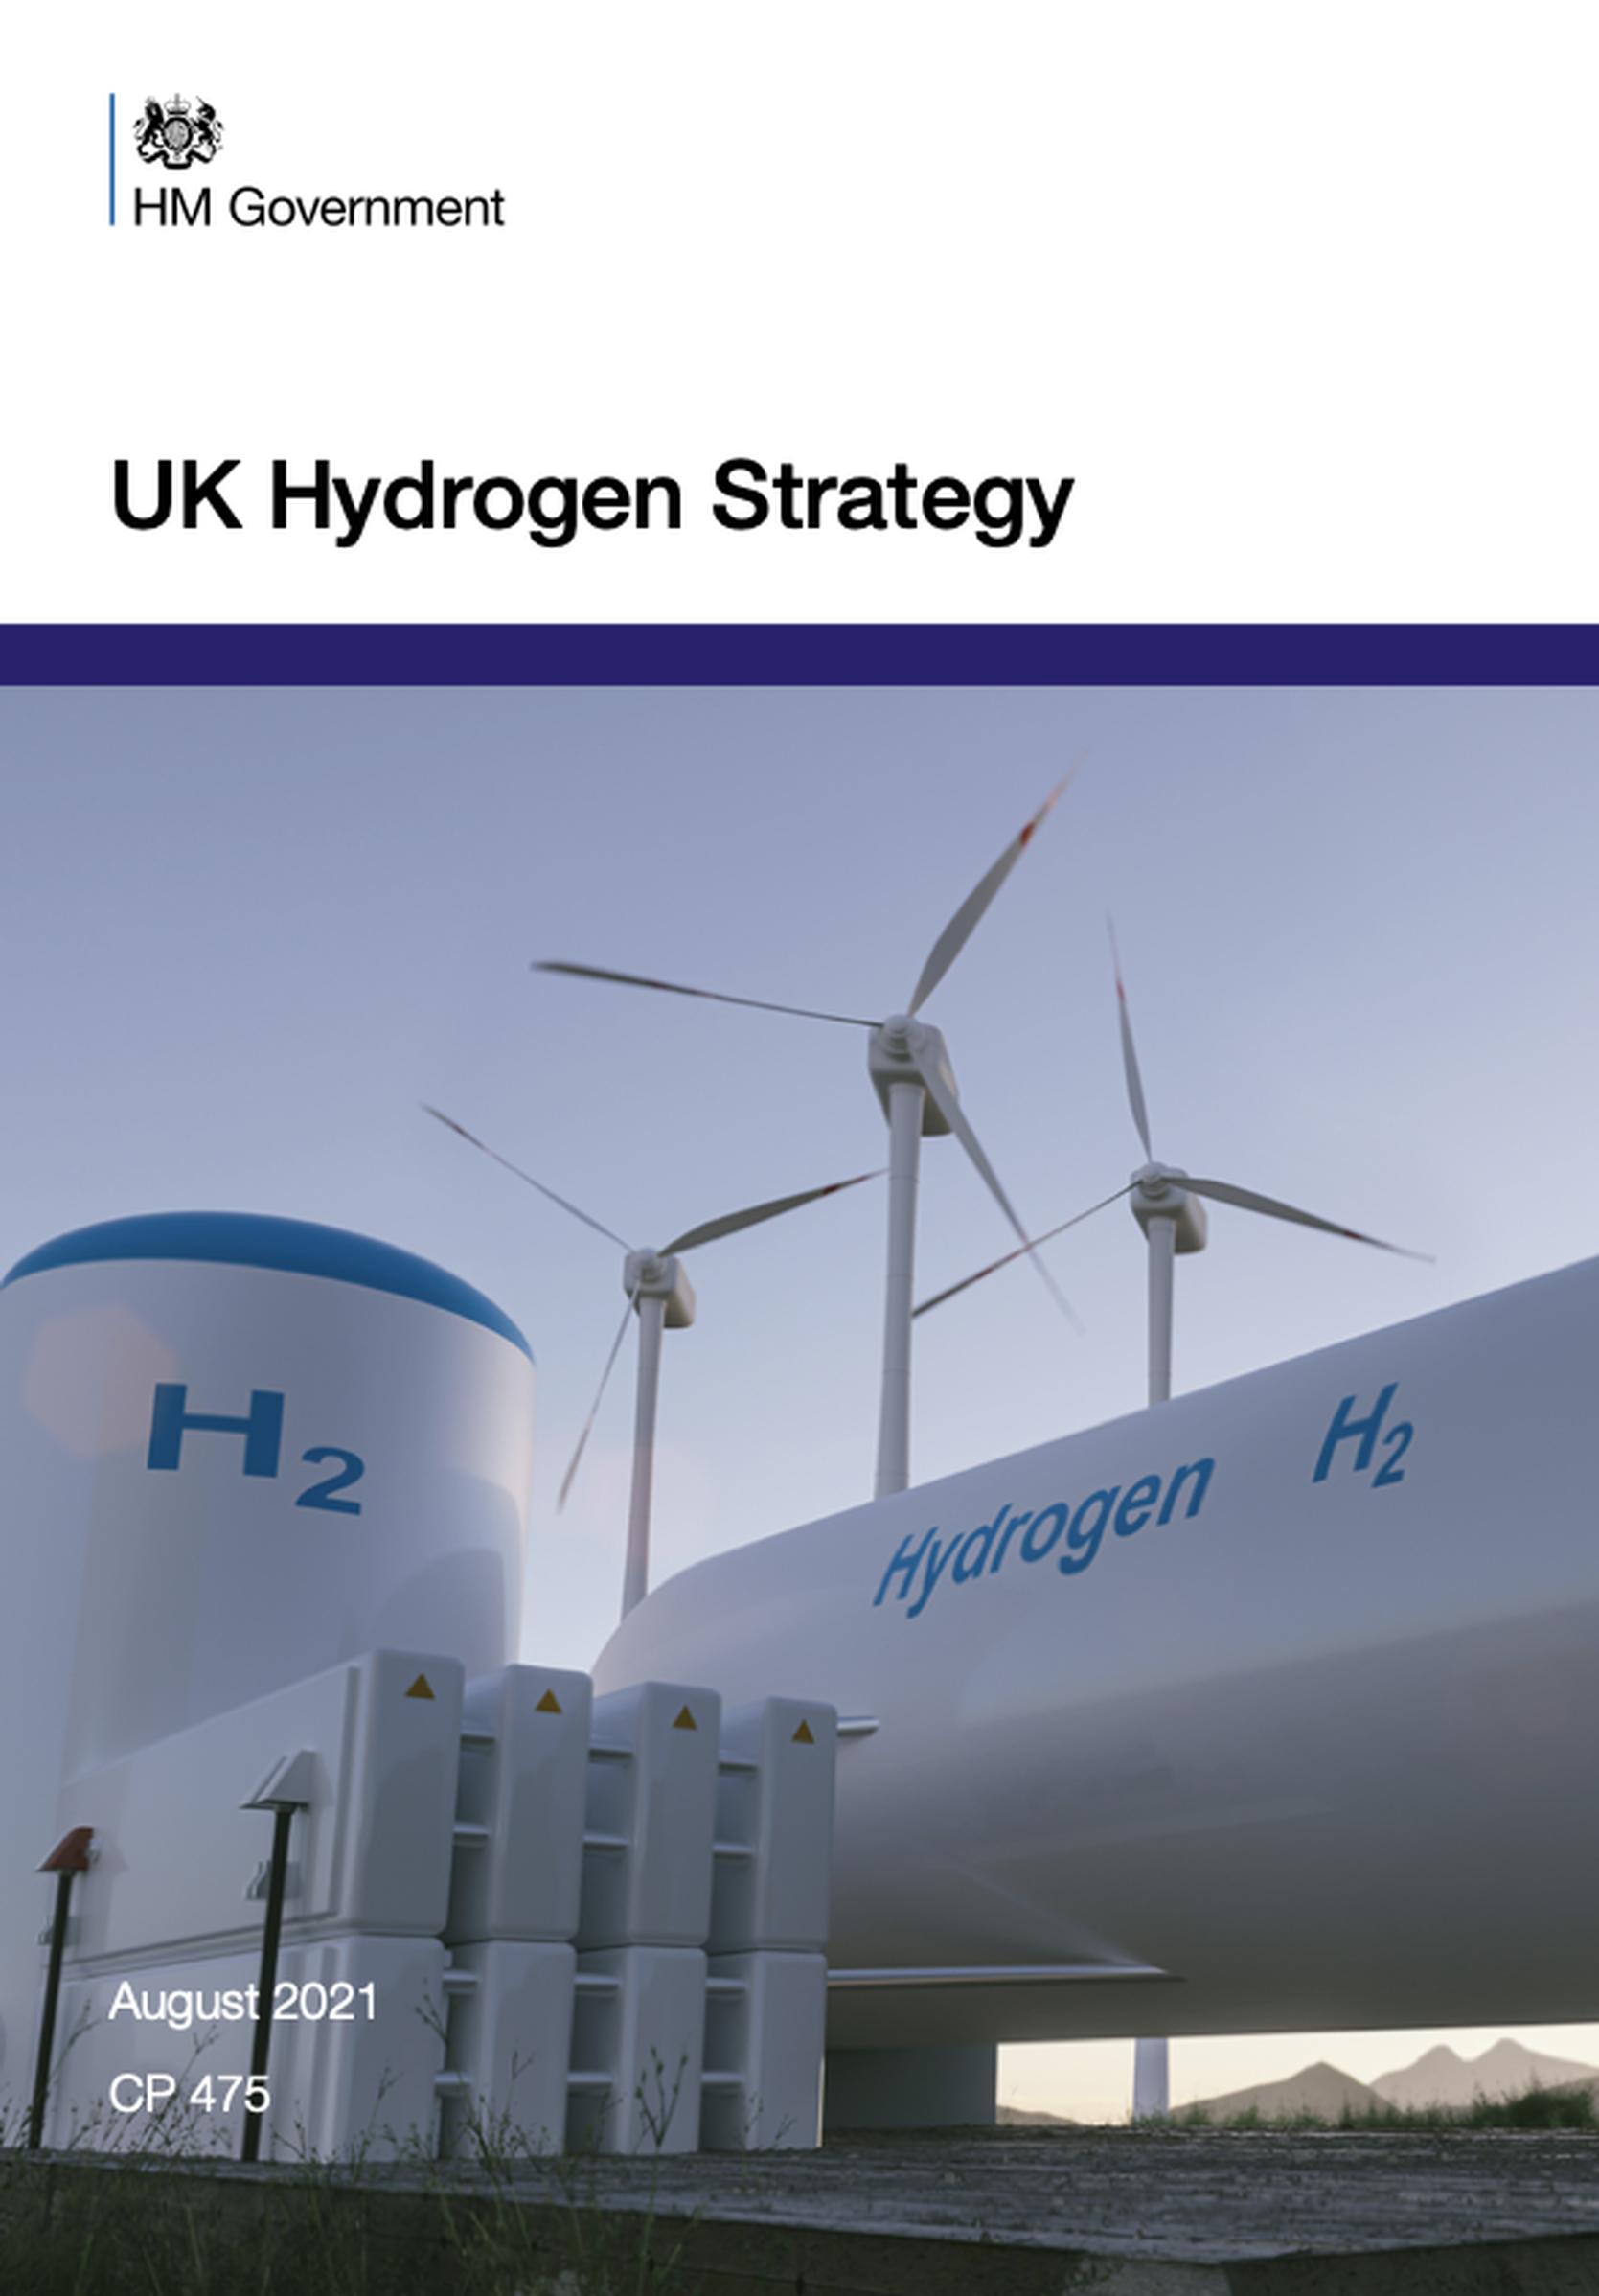 The Hydrogen Strategy